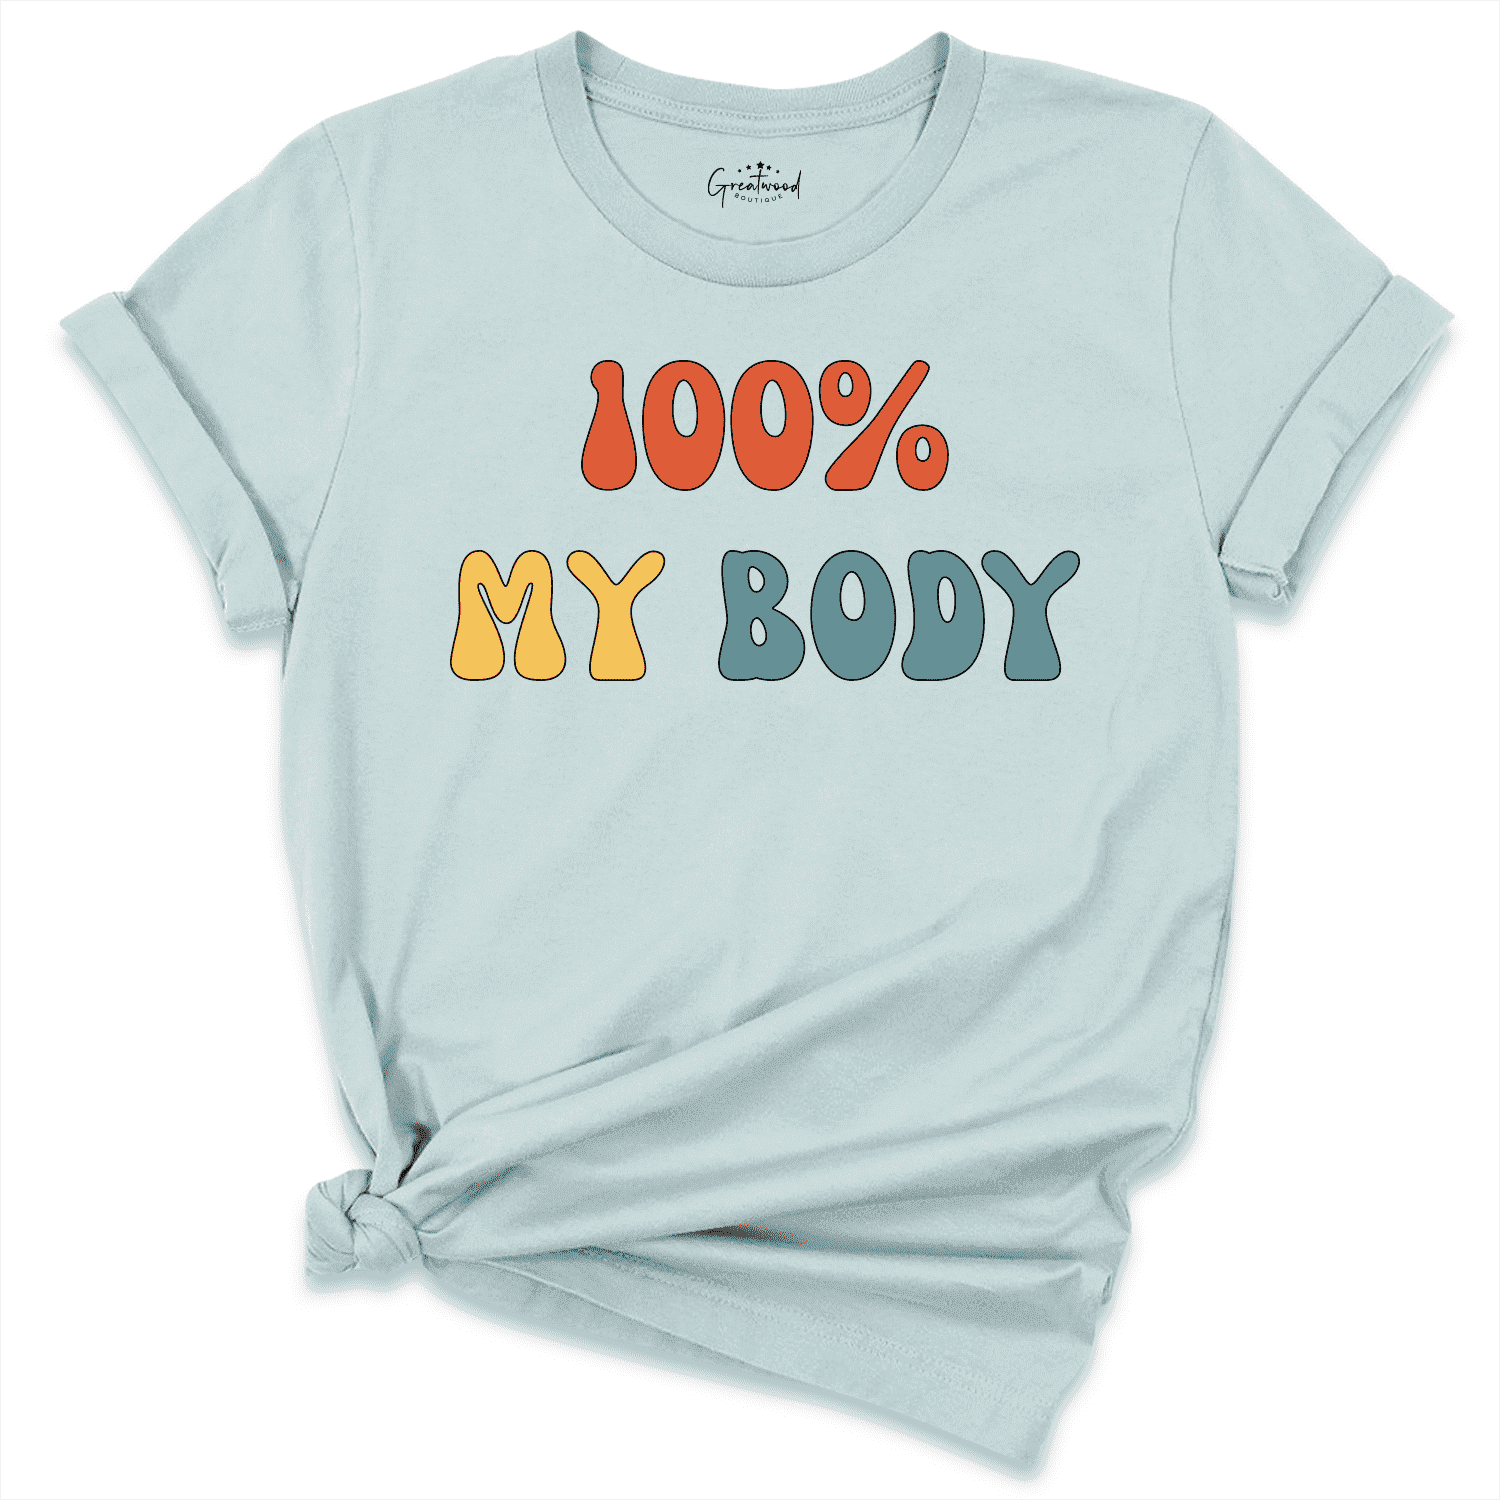 100% My Body Shirt Blue - Greatwood Boutique